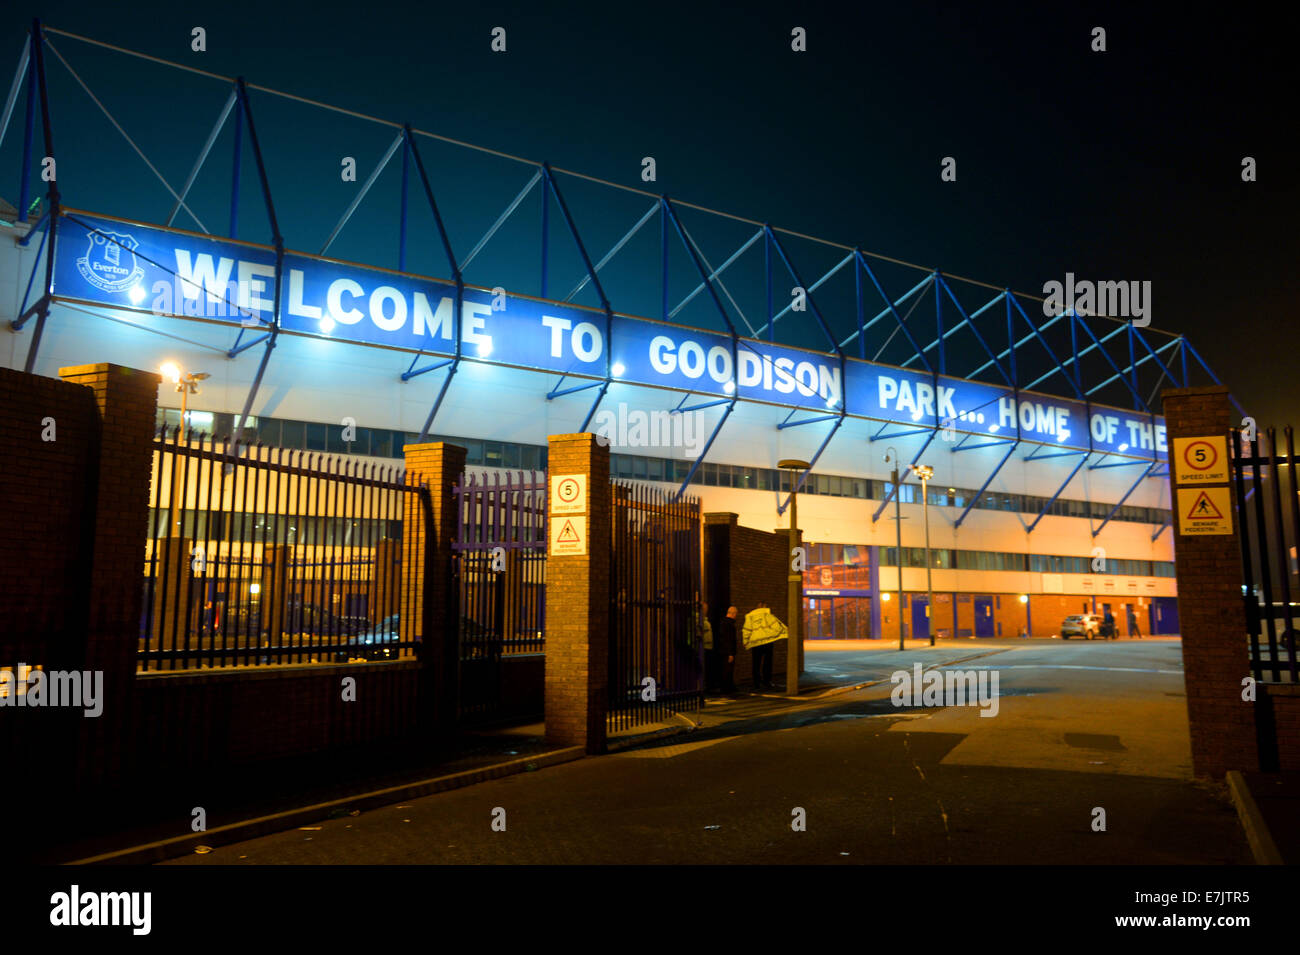 Liverpool, UK. 18th Sep, 2014. View of the Goodison Park stadium of FC Everton in Liverpool, 18 September 2014. © dpa picture alliance/Alamy Live News Stock Photo